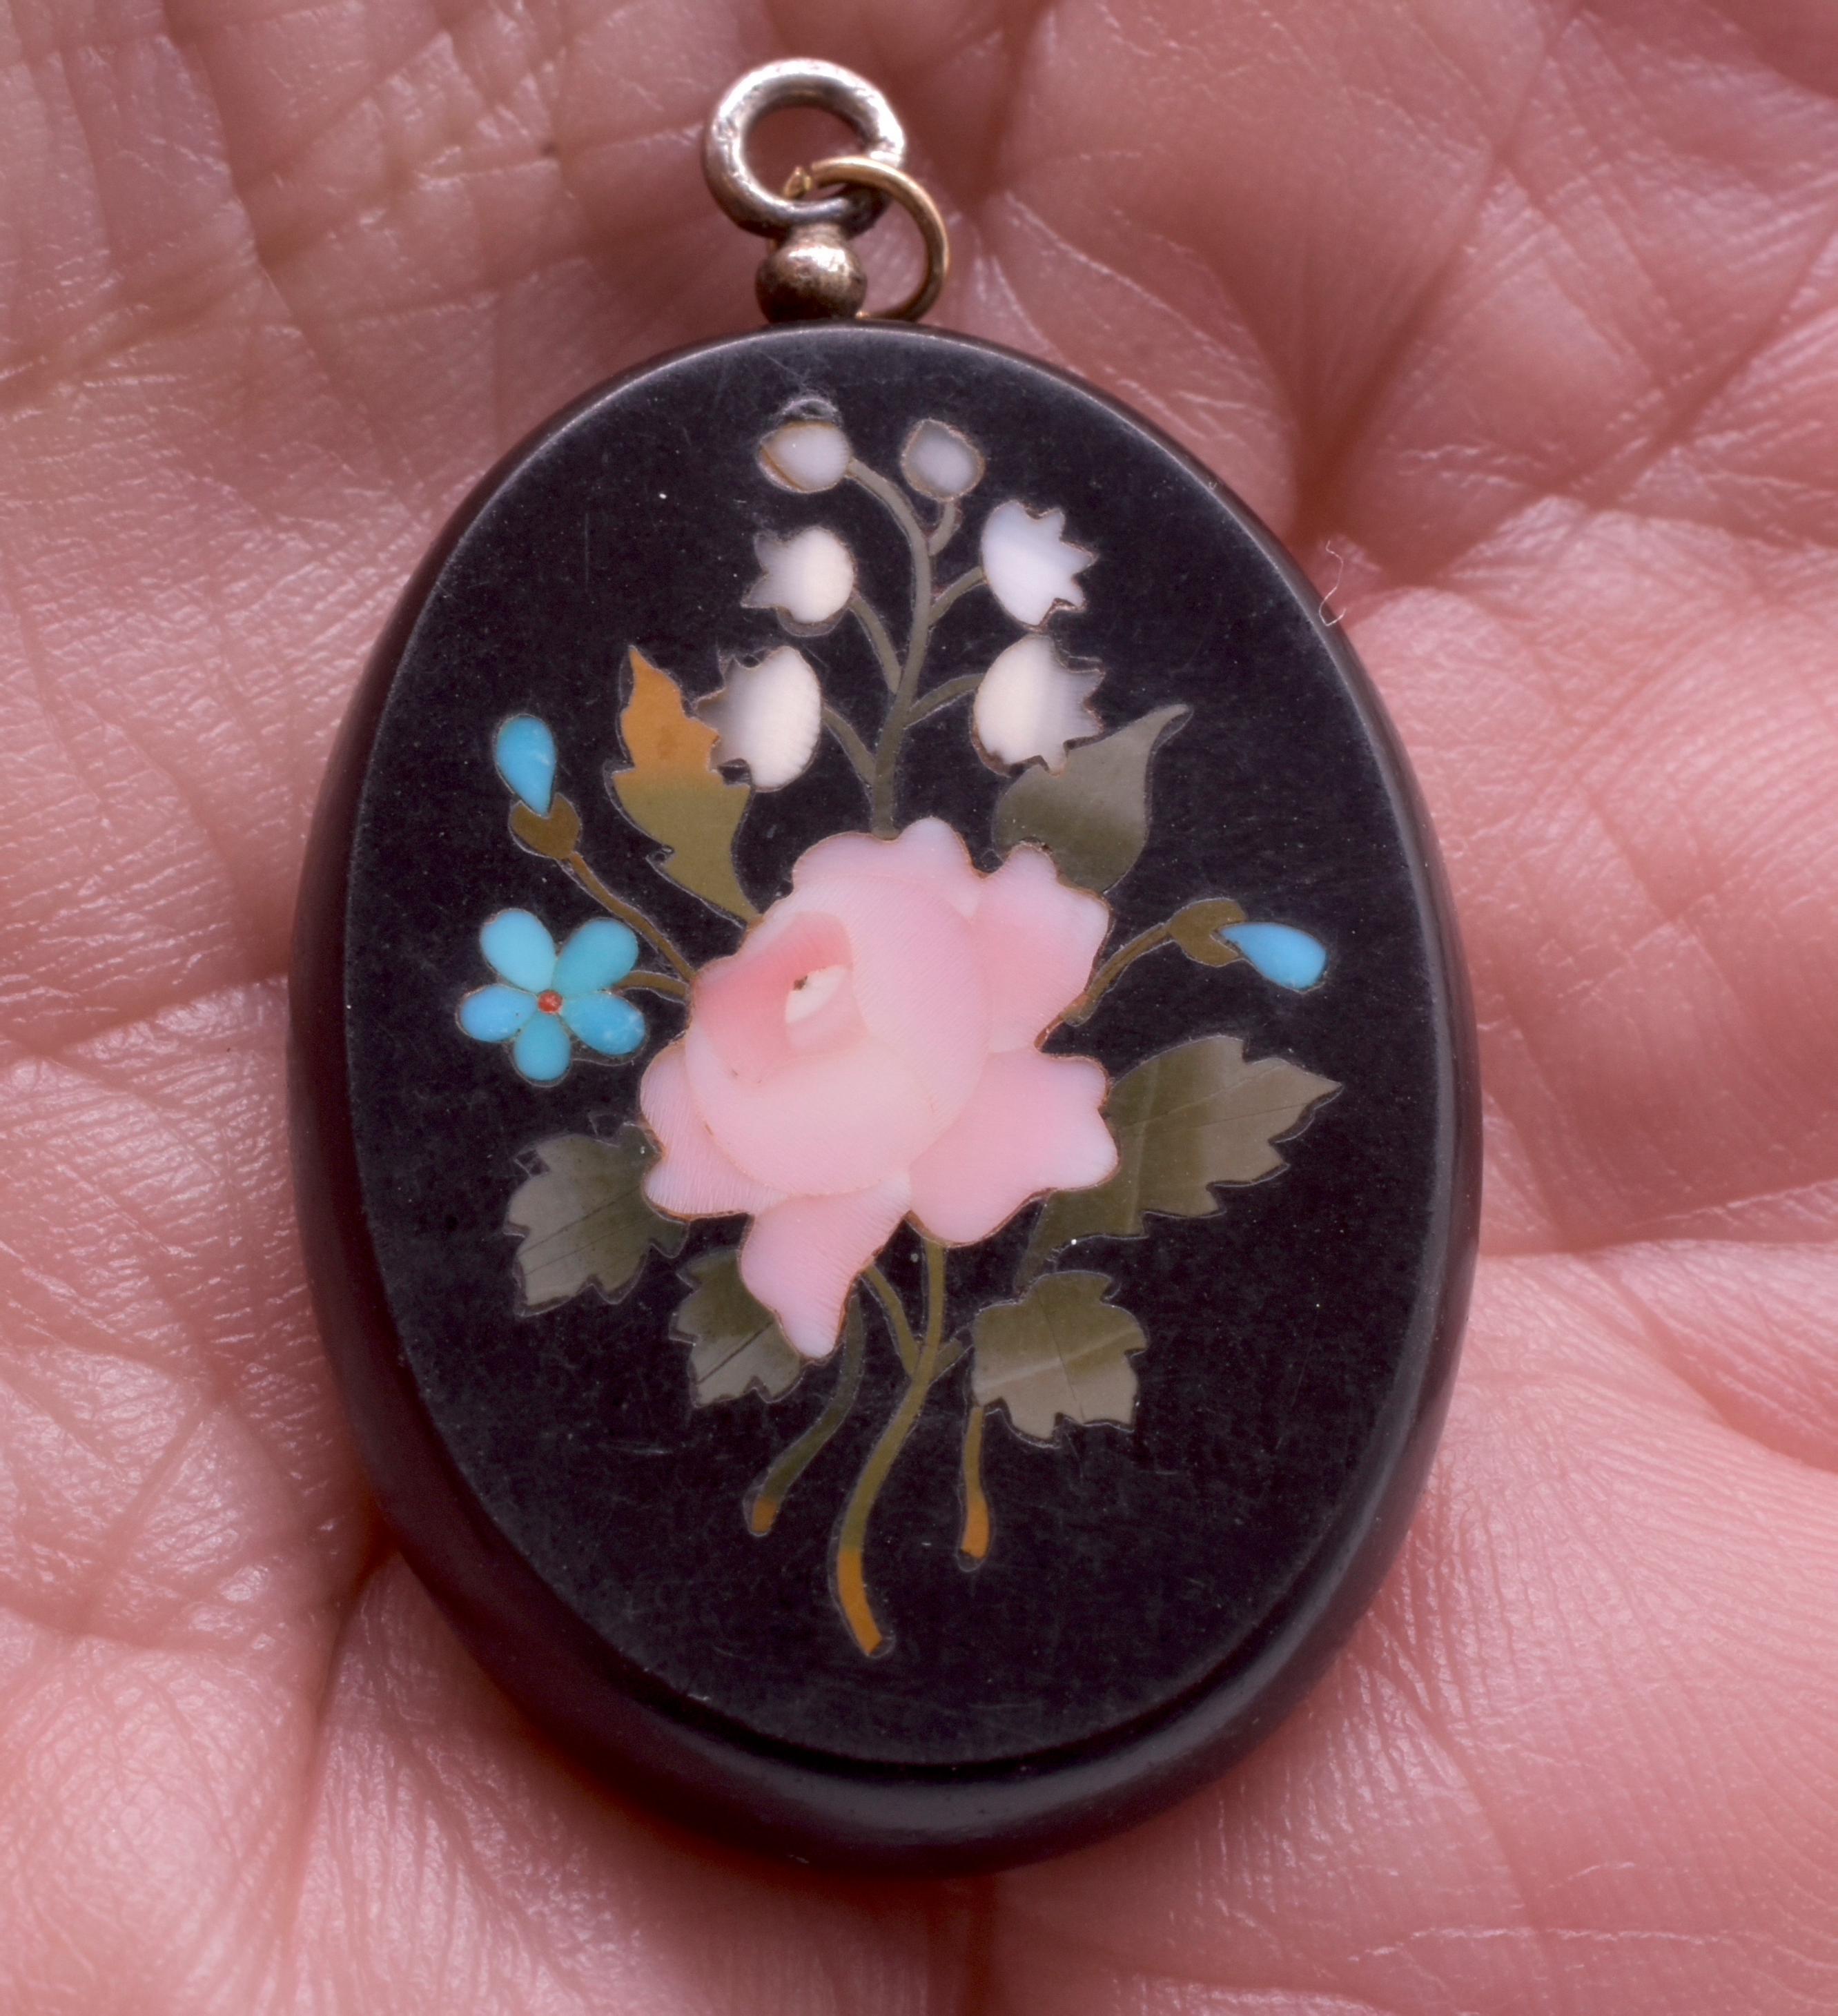 This is a lovely Victorian Pietra Dura locket pendant with its original 15K locket back.  Pietra Dura, otherwise known as Italian mosaic, is an art form utilizing Inlaid hard stones such as marble, agate, and turquoise to form a floral design. This